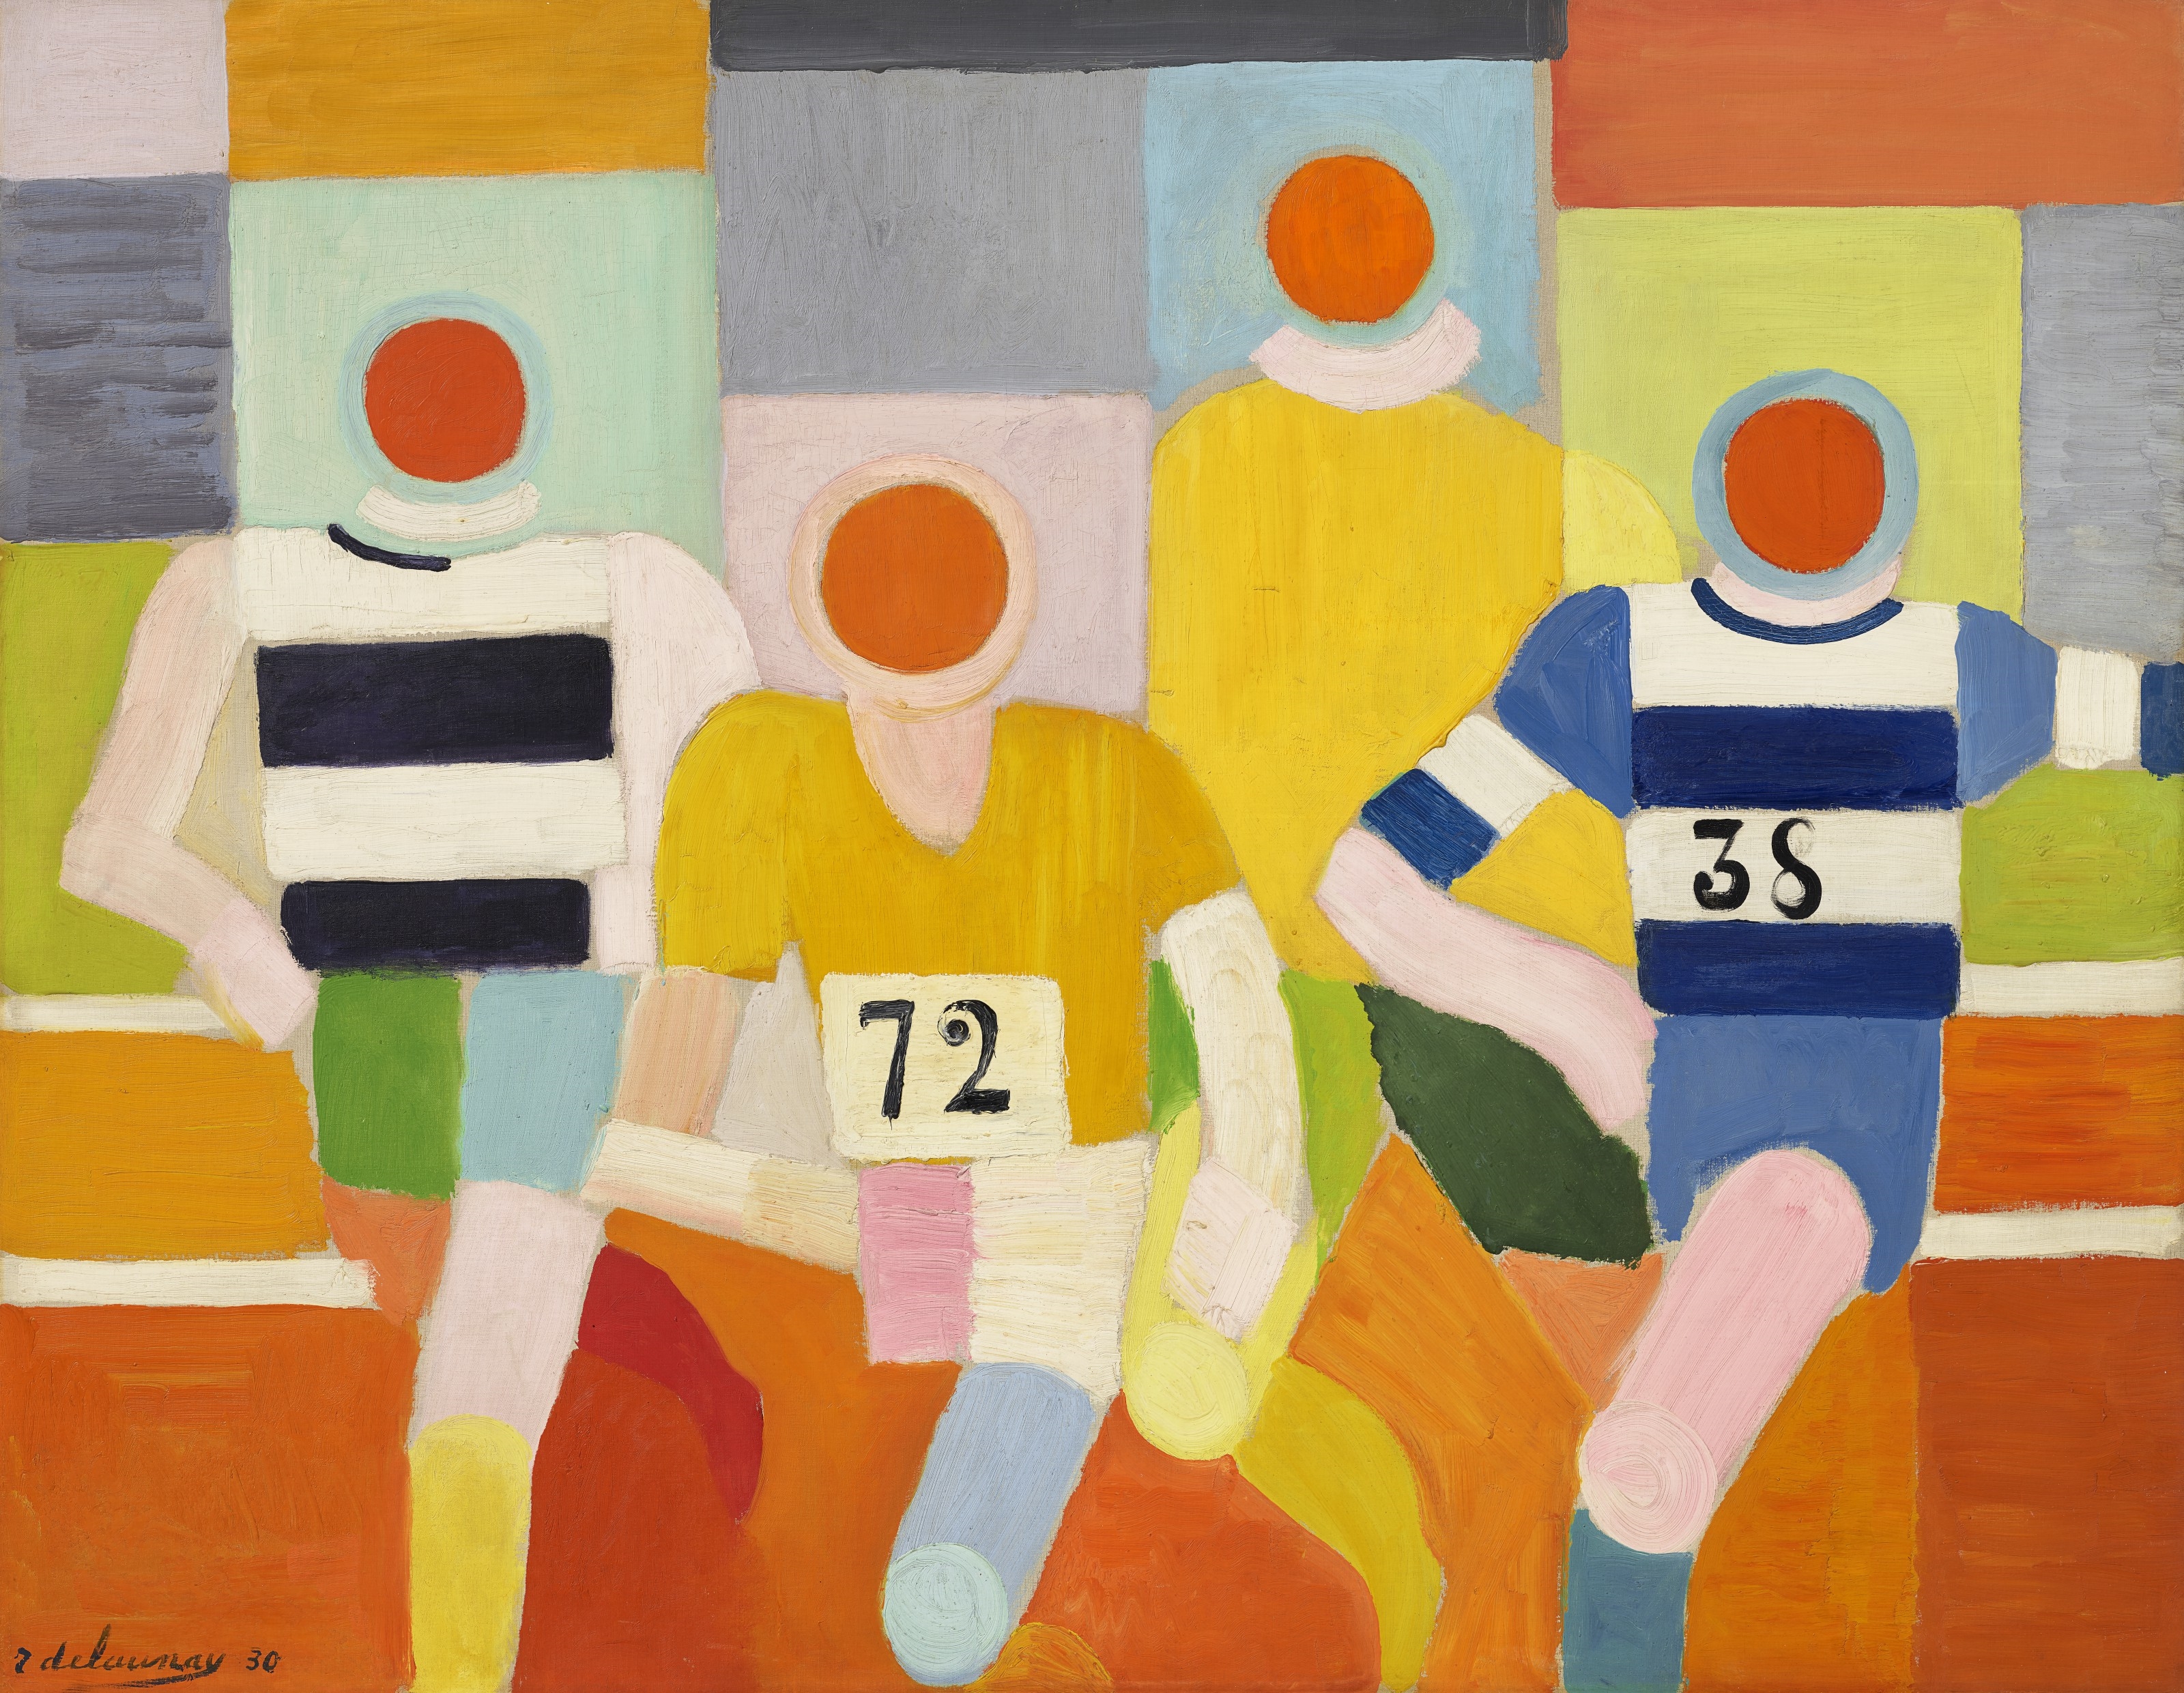 Les Coureurs by Robert Delaunay, 1930, Painted in 1930